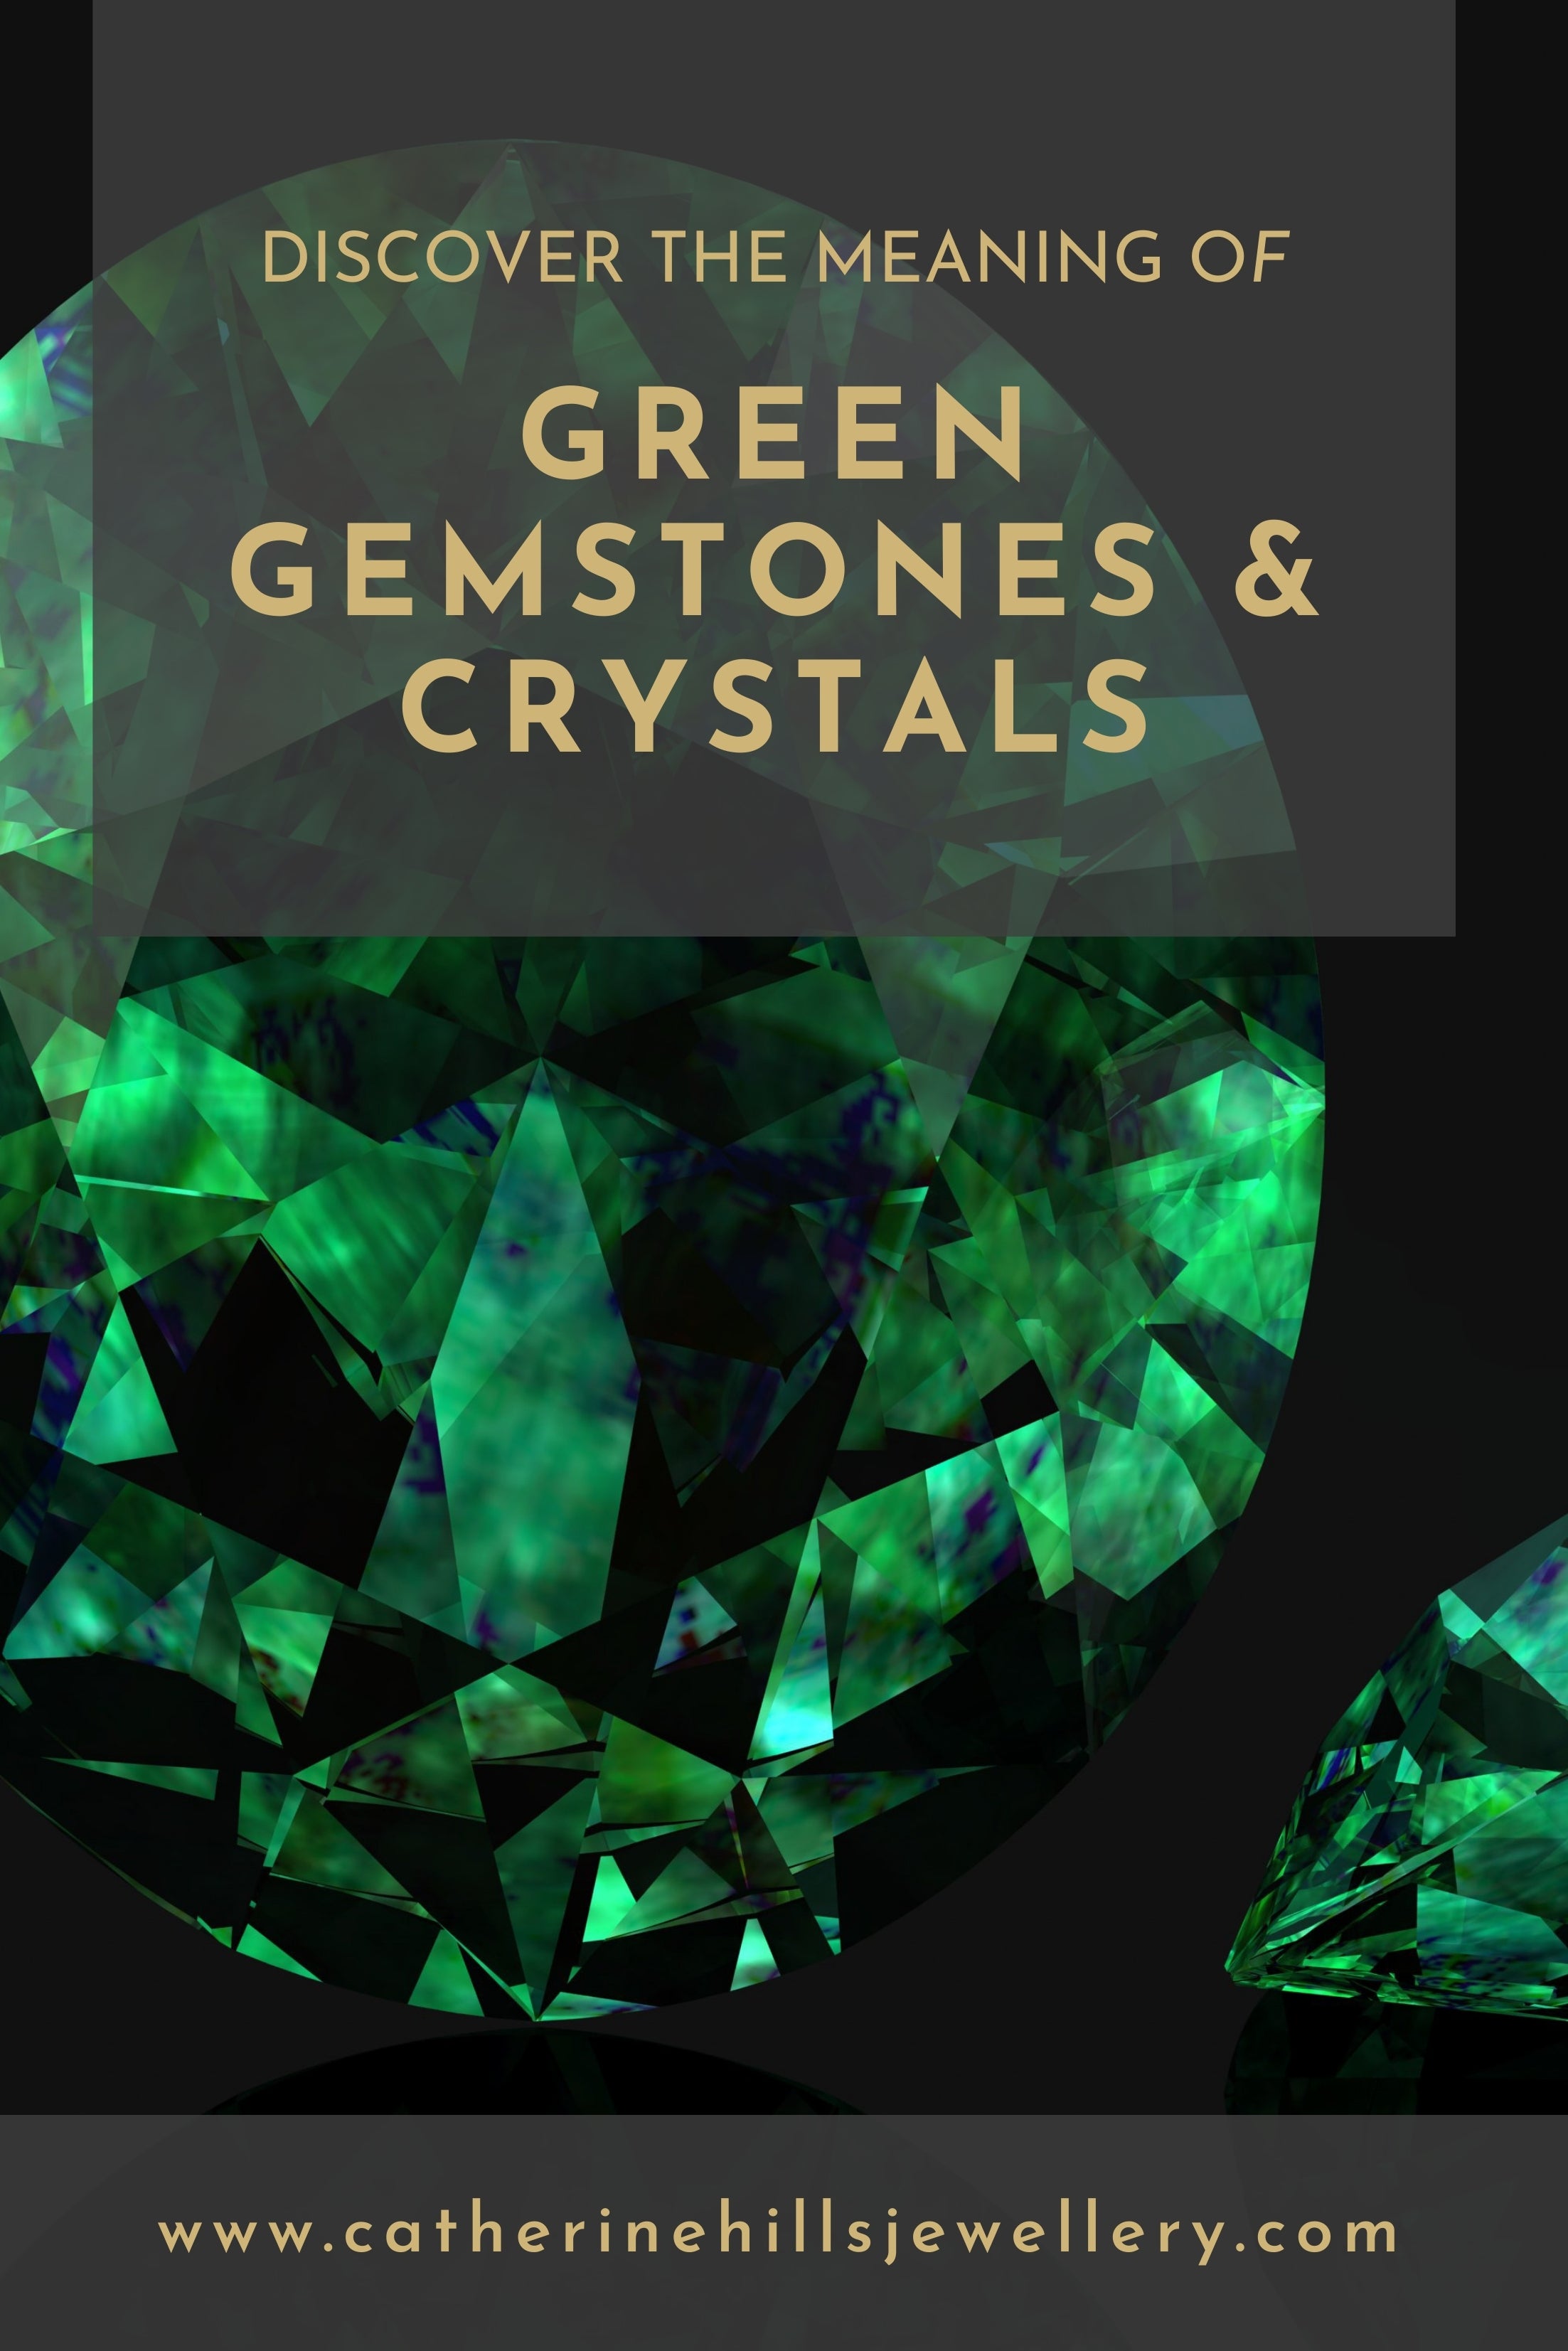 Discover the meaning of green gemstones and crystals